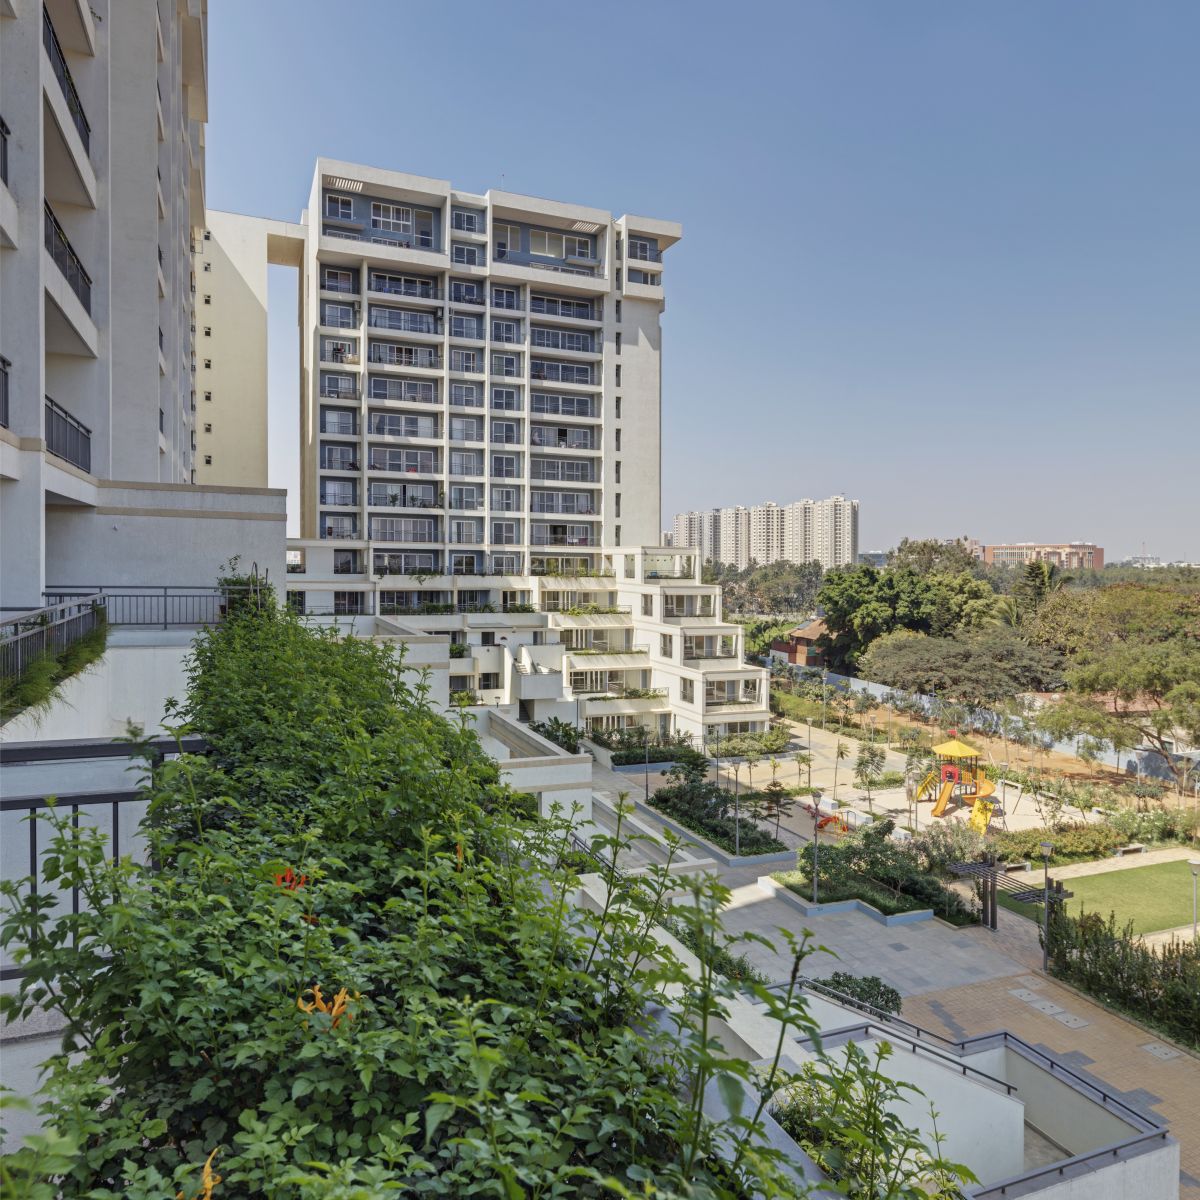 Terraced Residential Highrise, at Nallurhalli Road, Siddhapura, Bangalore, by CnT Architects 9